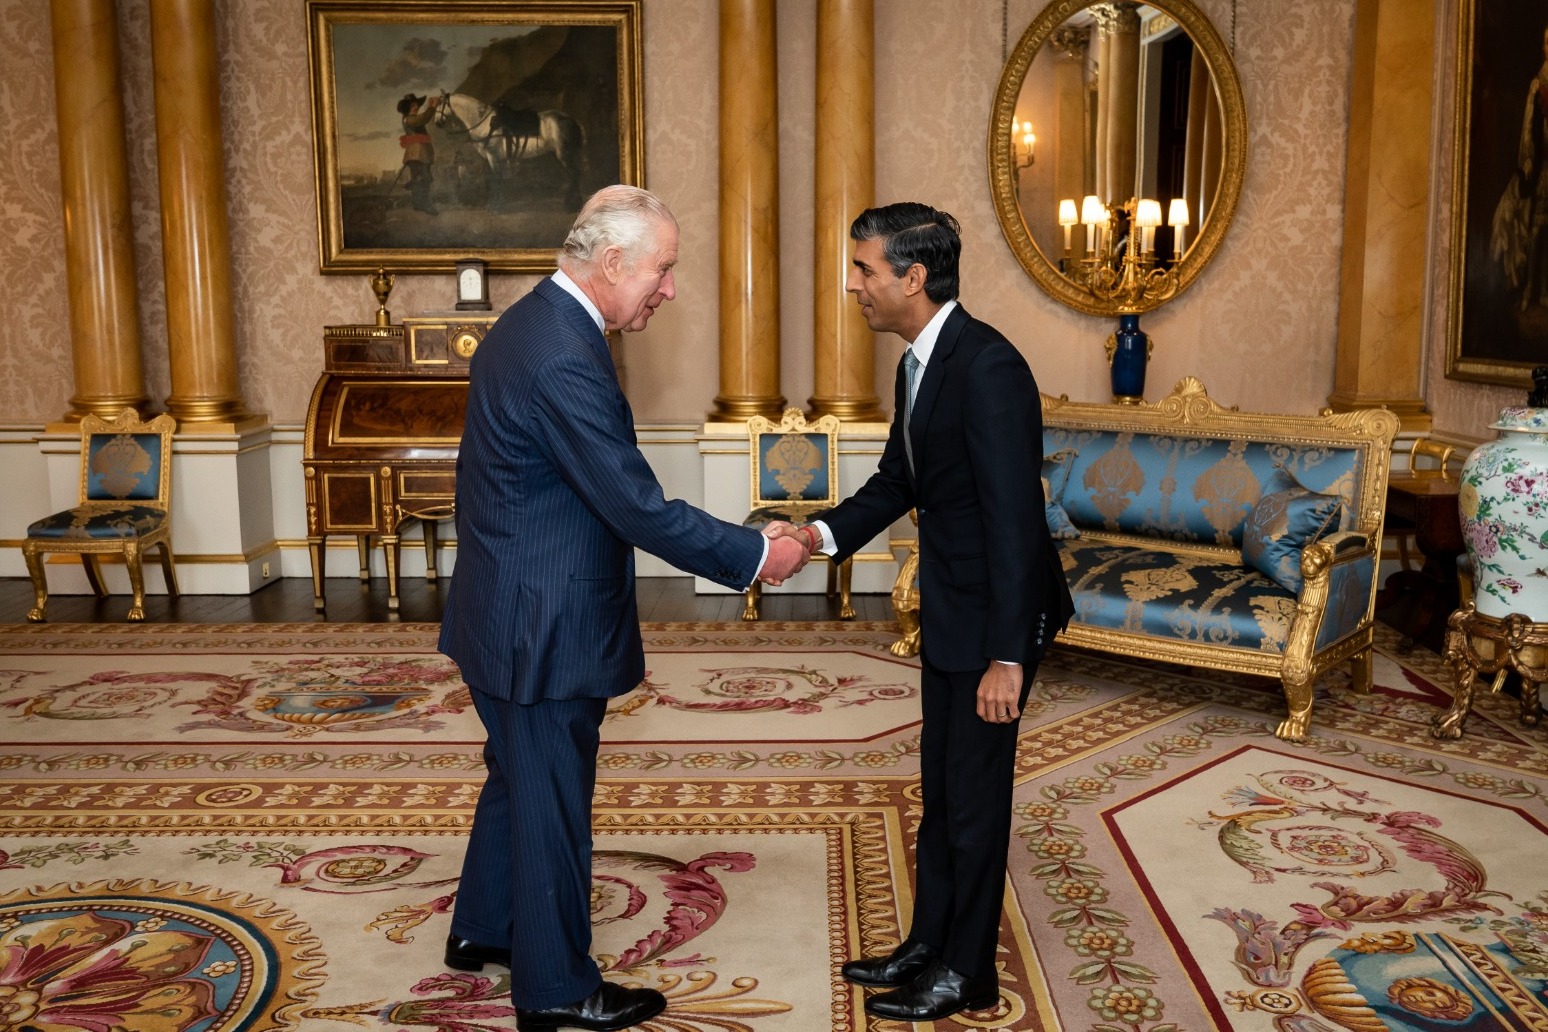 Rishi Sunak becomes Prime Minister after meeting King at Buckingham Palace 